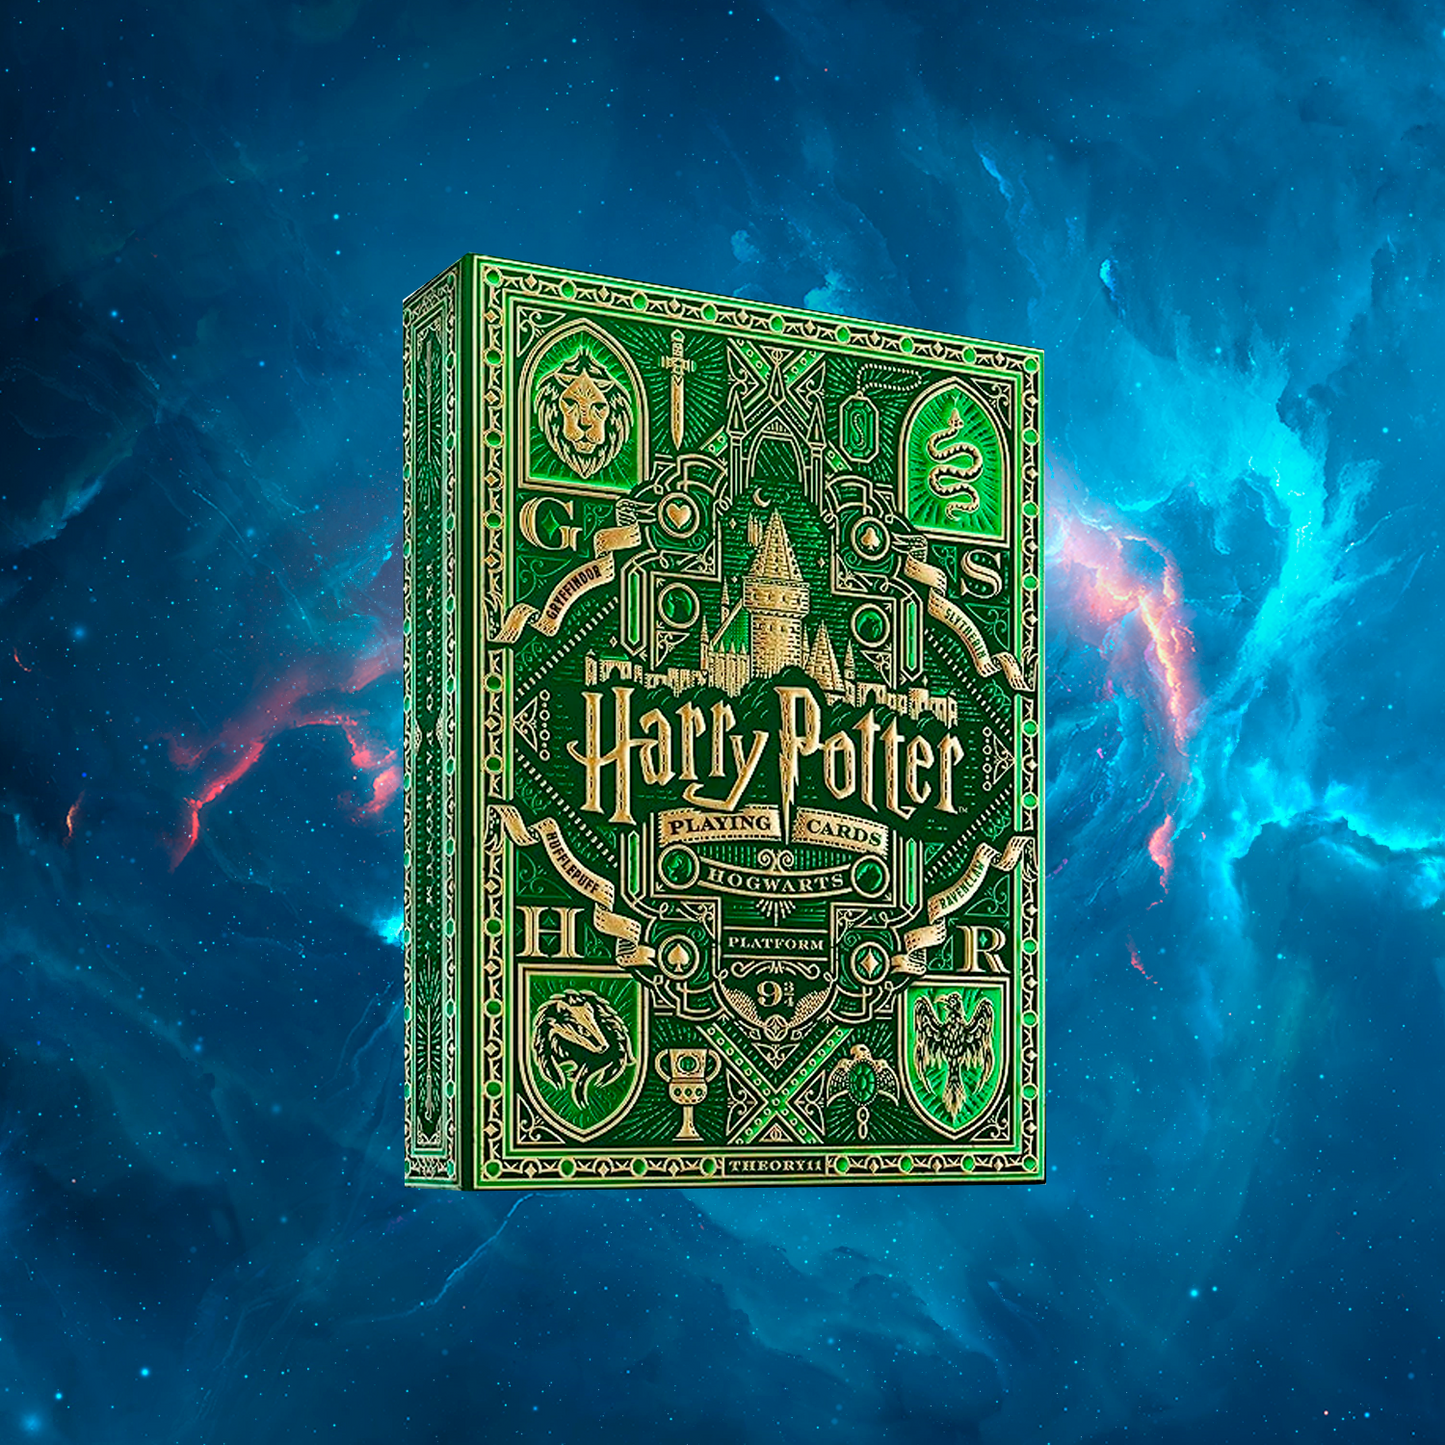 HARRY POTTER - SLYTHERIN PLAYING CARDS